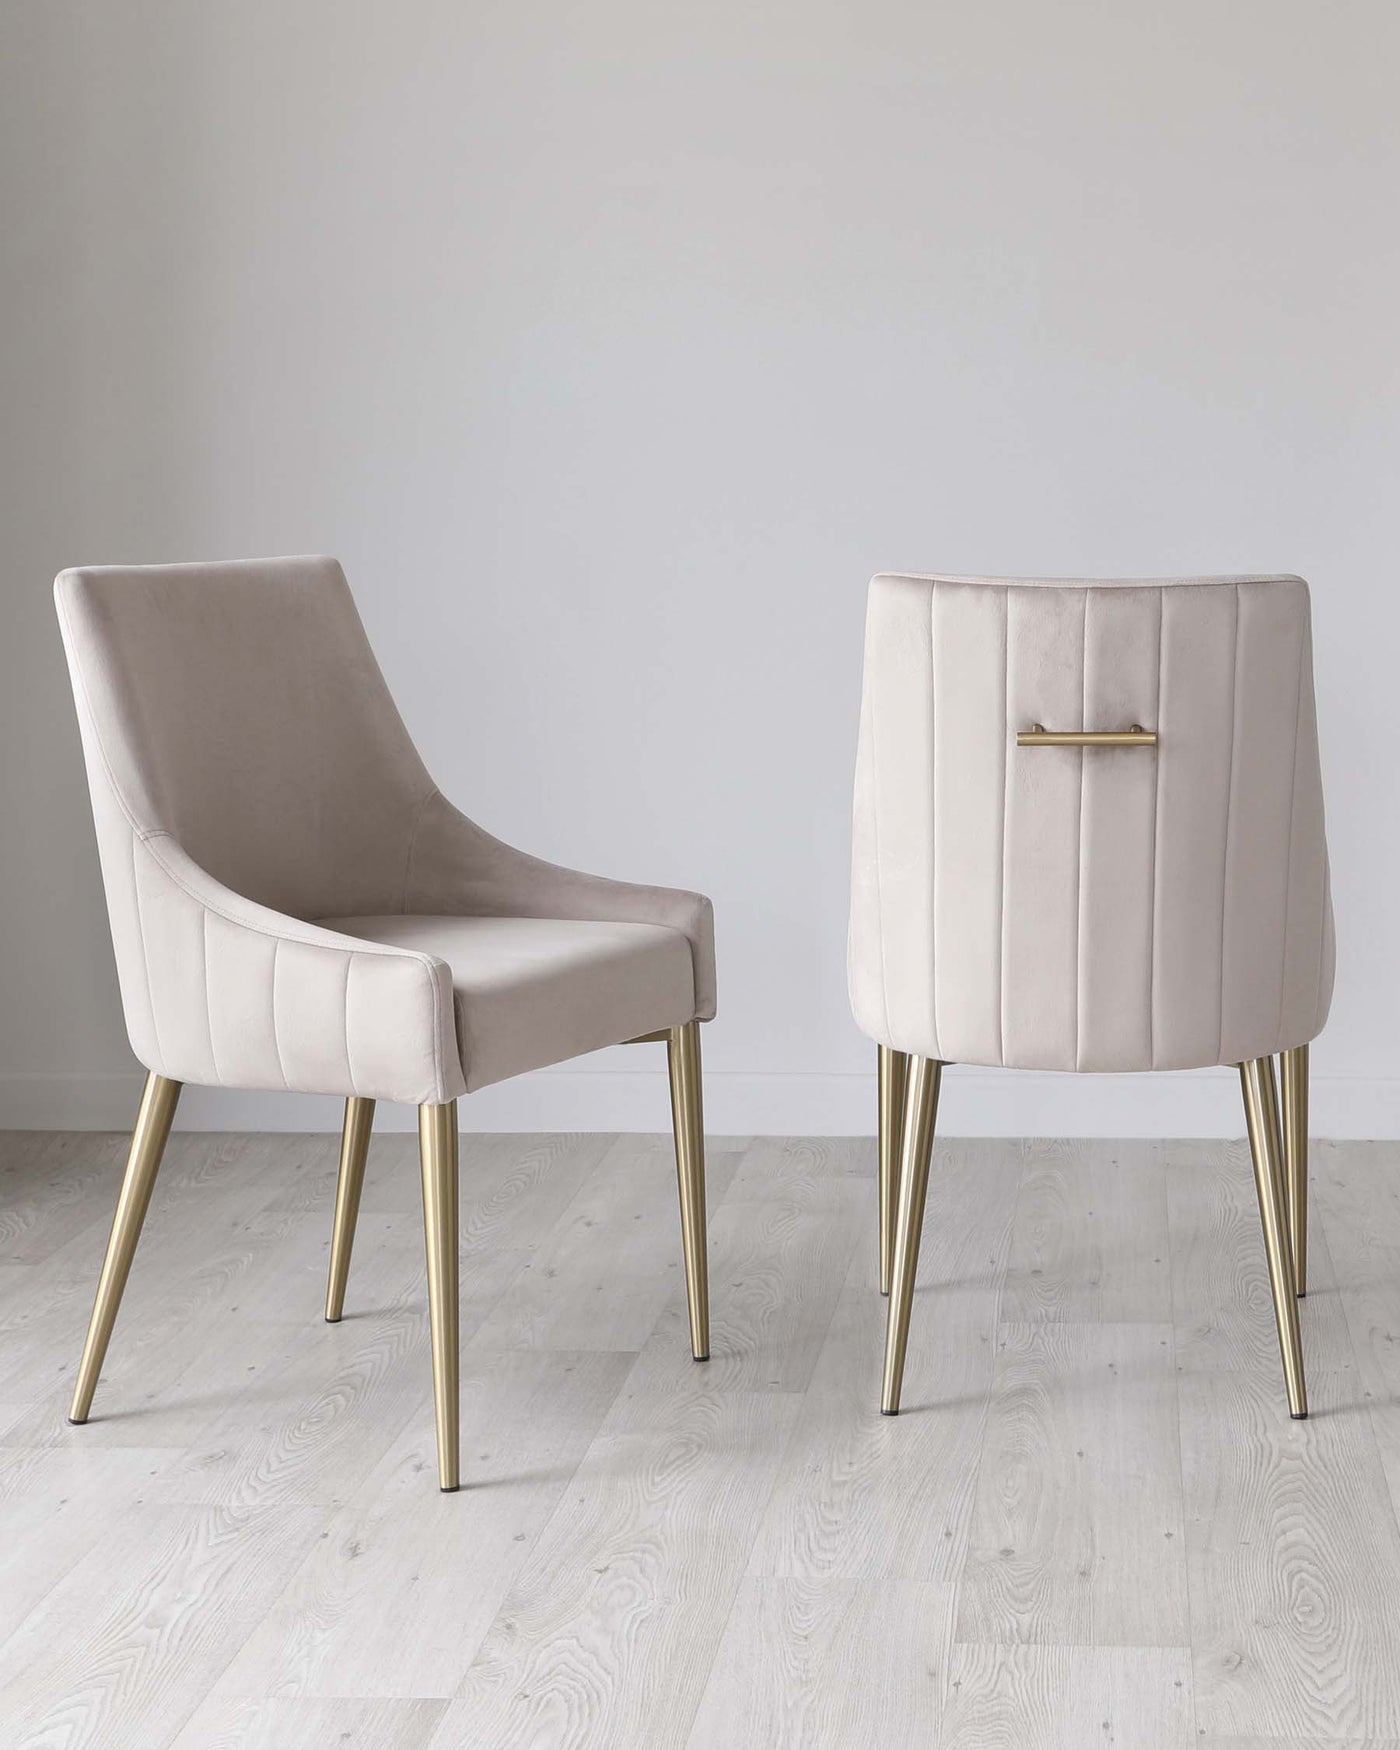 Juliana Champagne Velvet With Brushed Brass Dining Chair - Set of 2